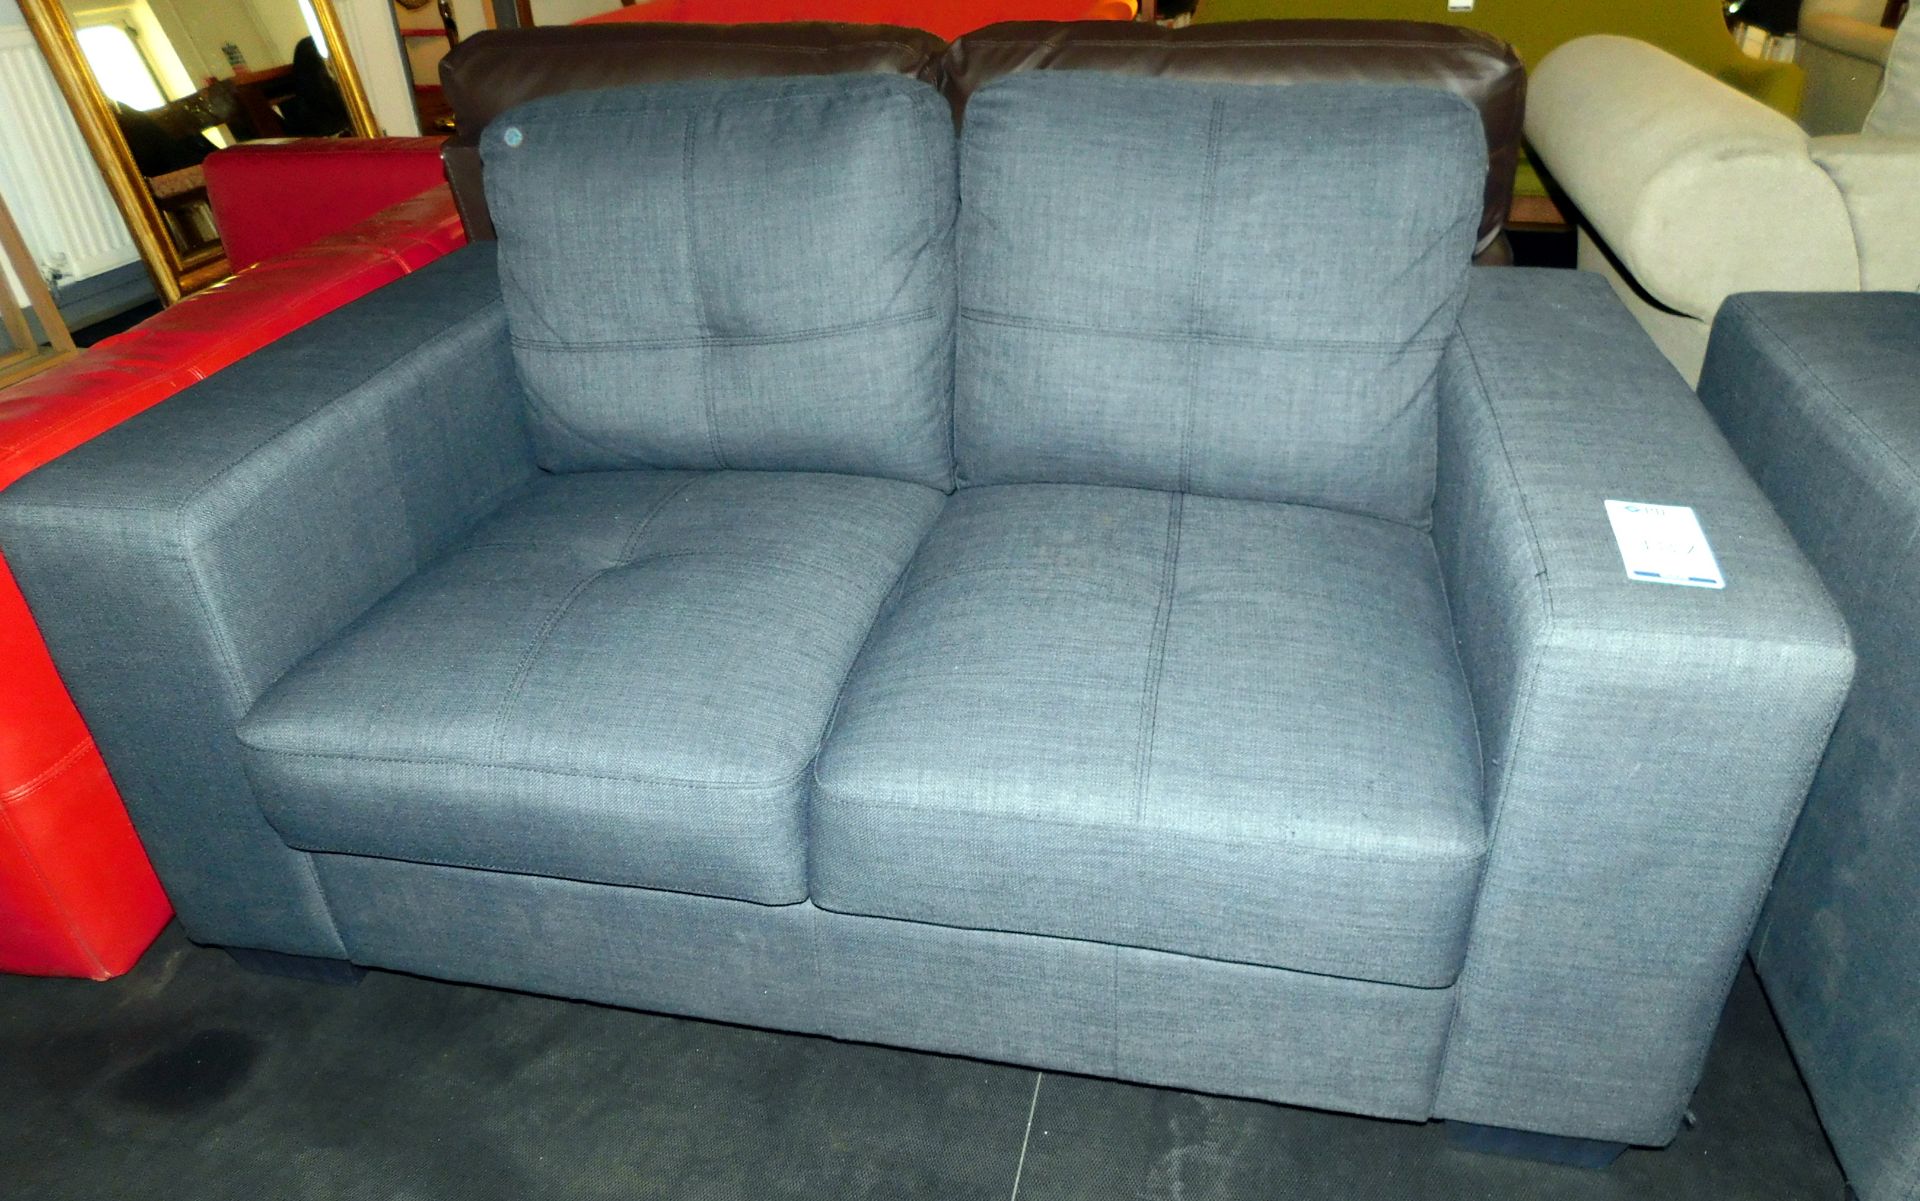 3 Seater Settee & 2 Seater Settee Upholstered (catalogue image) (Located Upminster, Please phone - Image 3 of 4